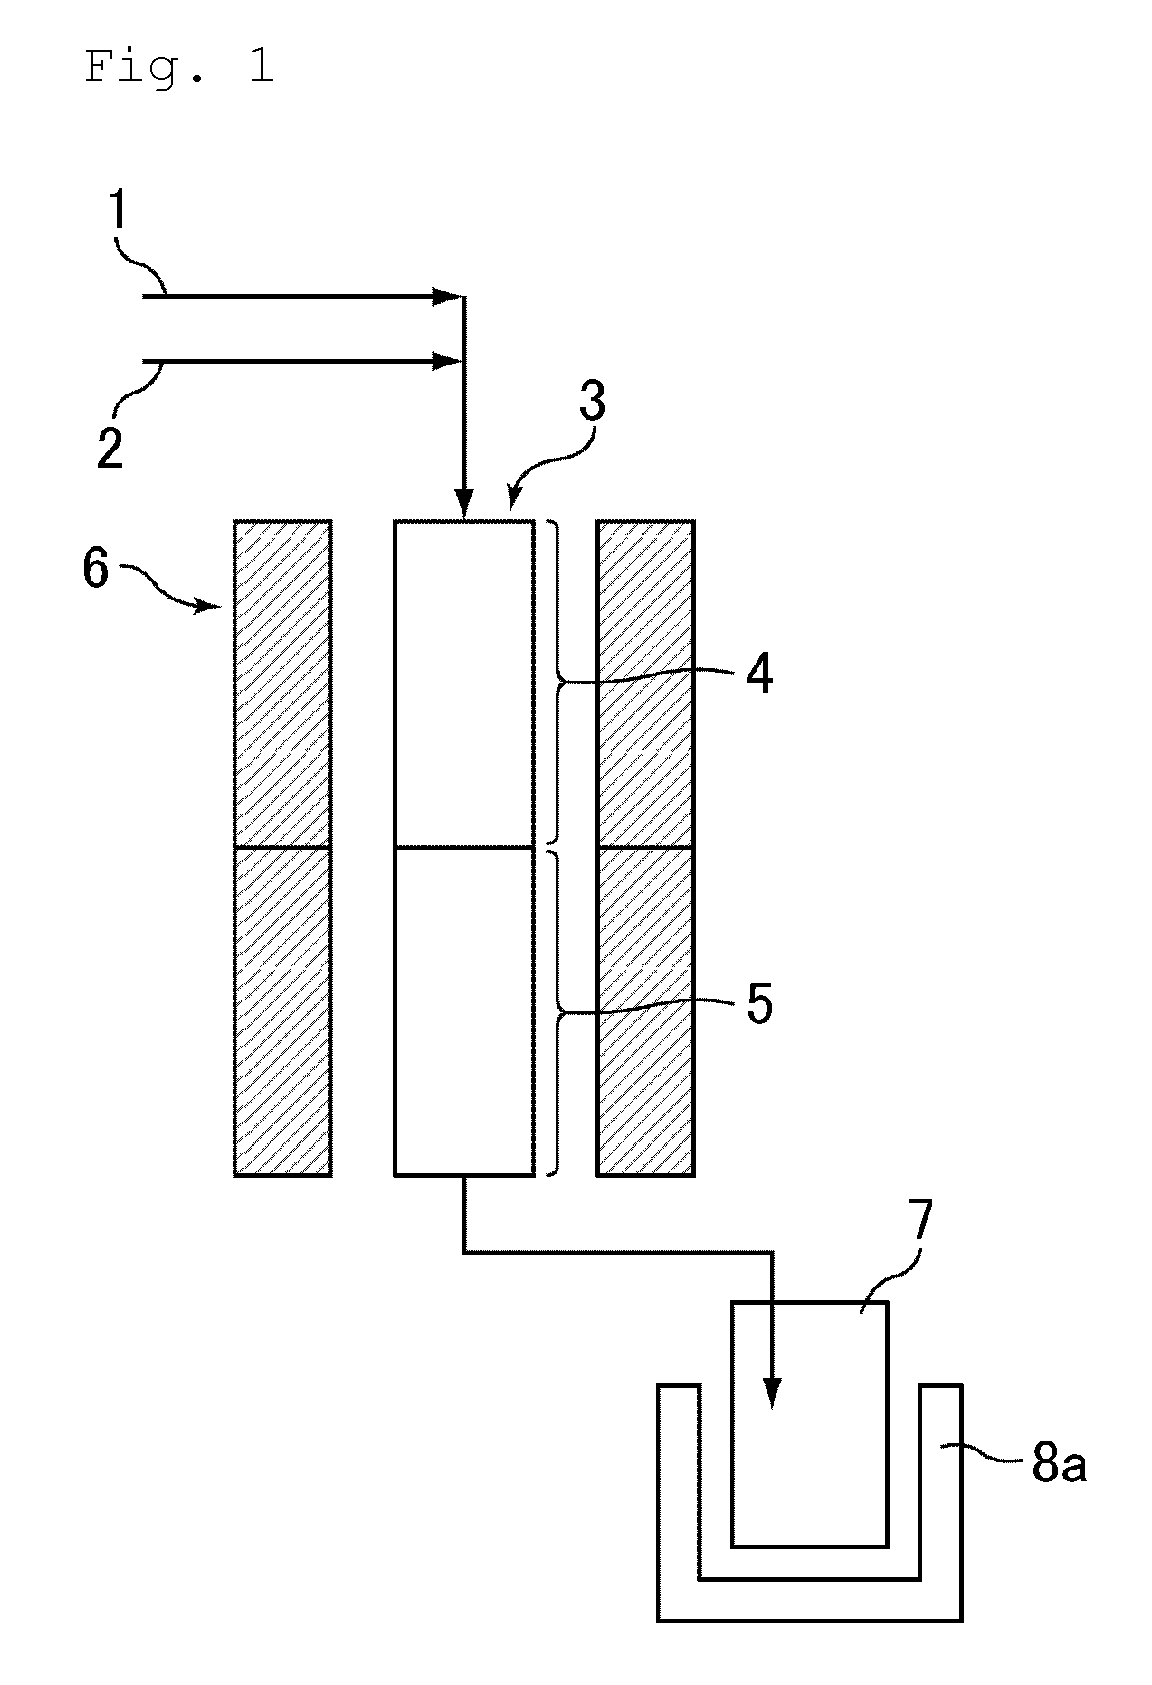 Synthesis system, rubber chemical substance for tires, synthetic rubber for tires, and pneumatic tire